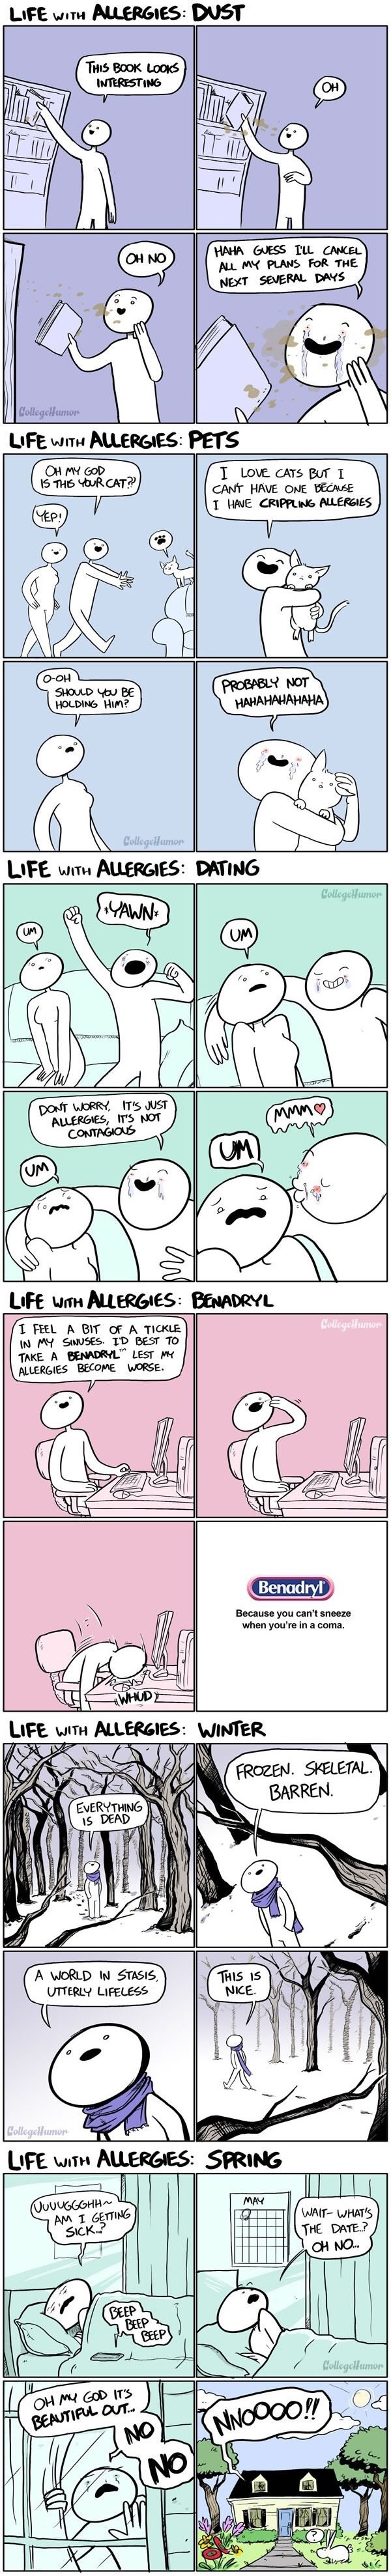 Life with allergies